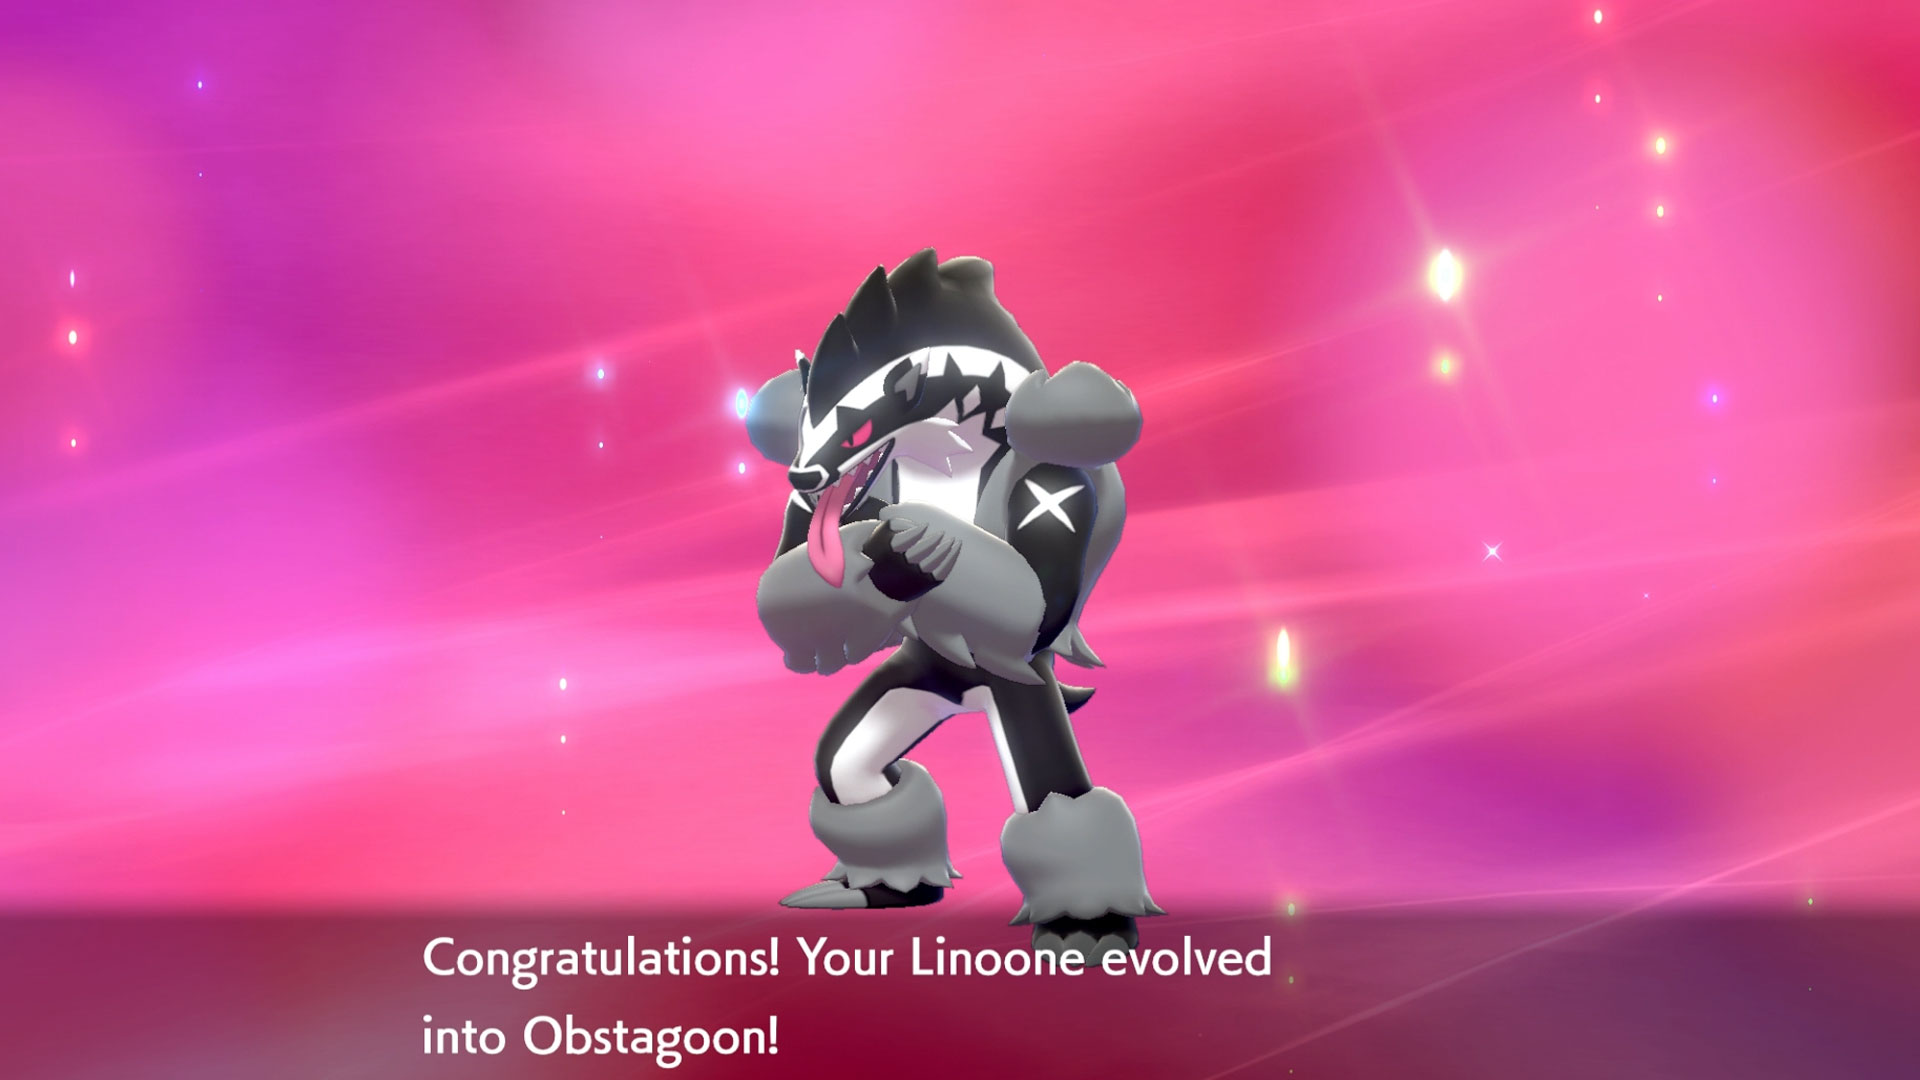 How To Evolve Galarian Linoone Into Obstagoon In Pokemon Sword And Shield Gamesradar